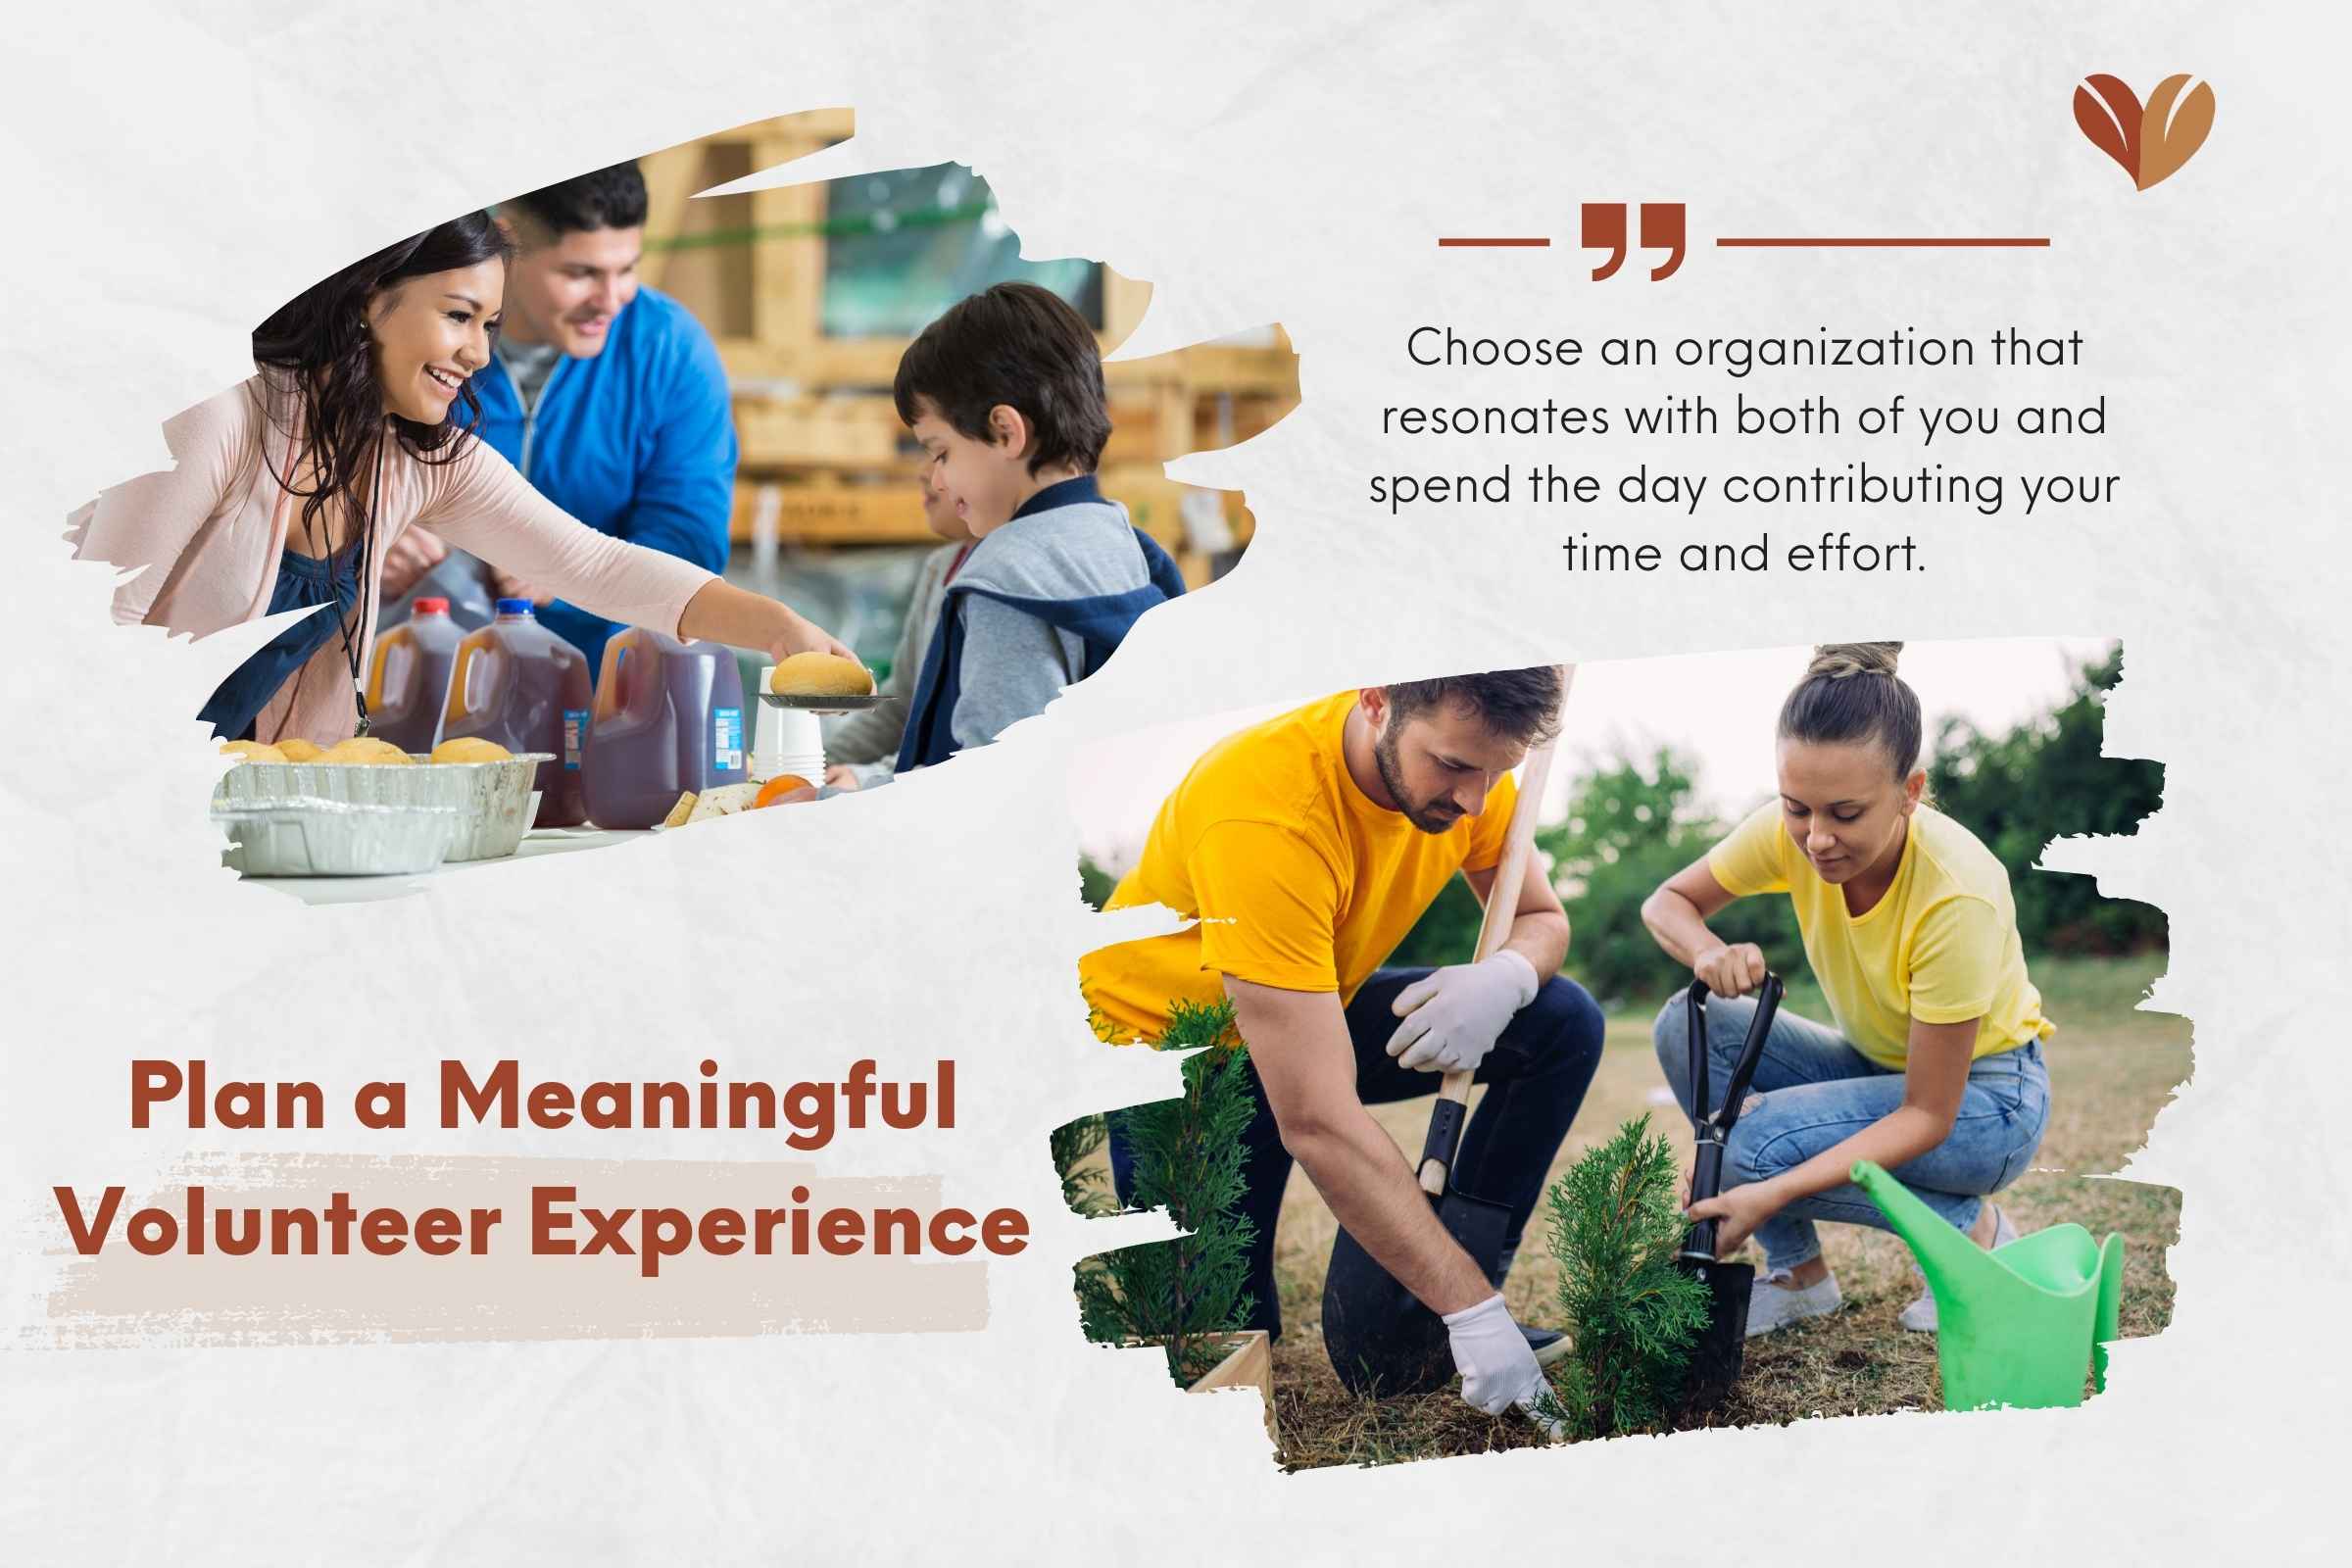 Plan a Meaningful Volunteer Experience